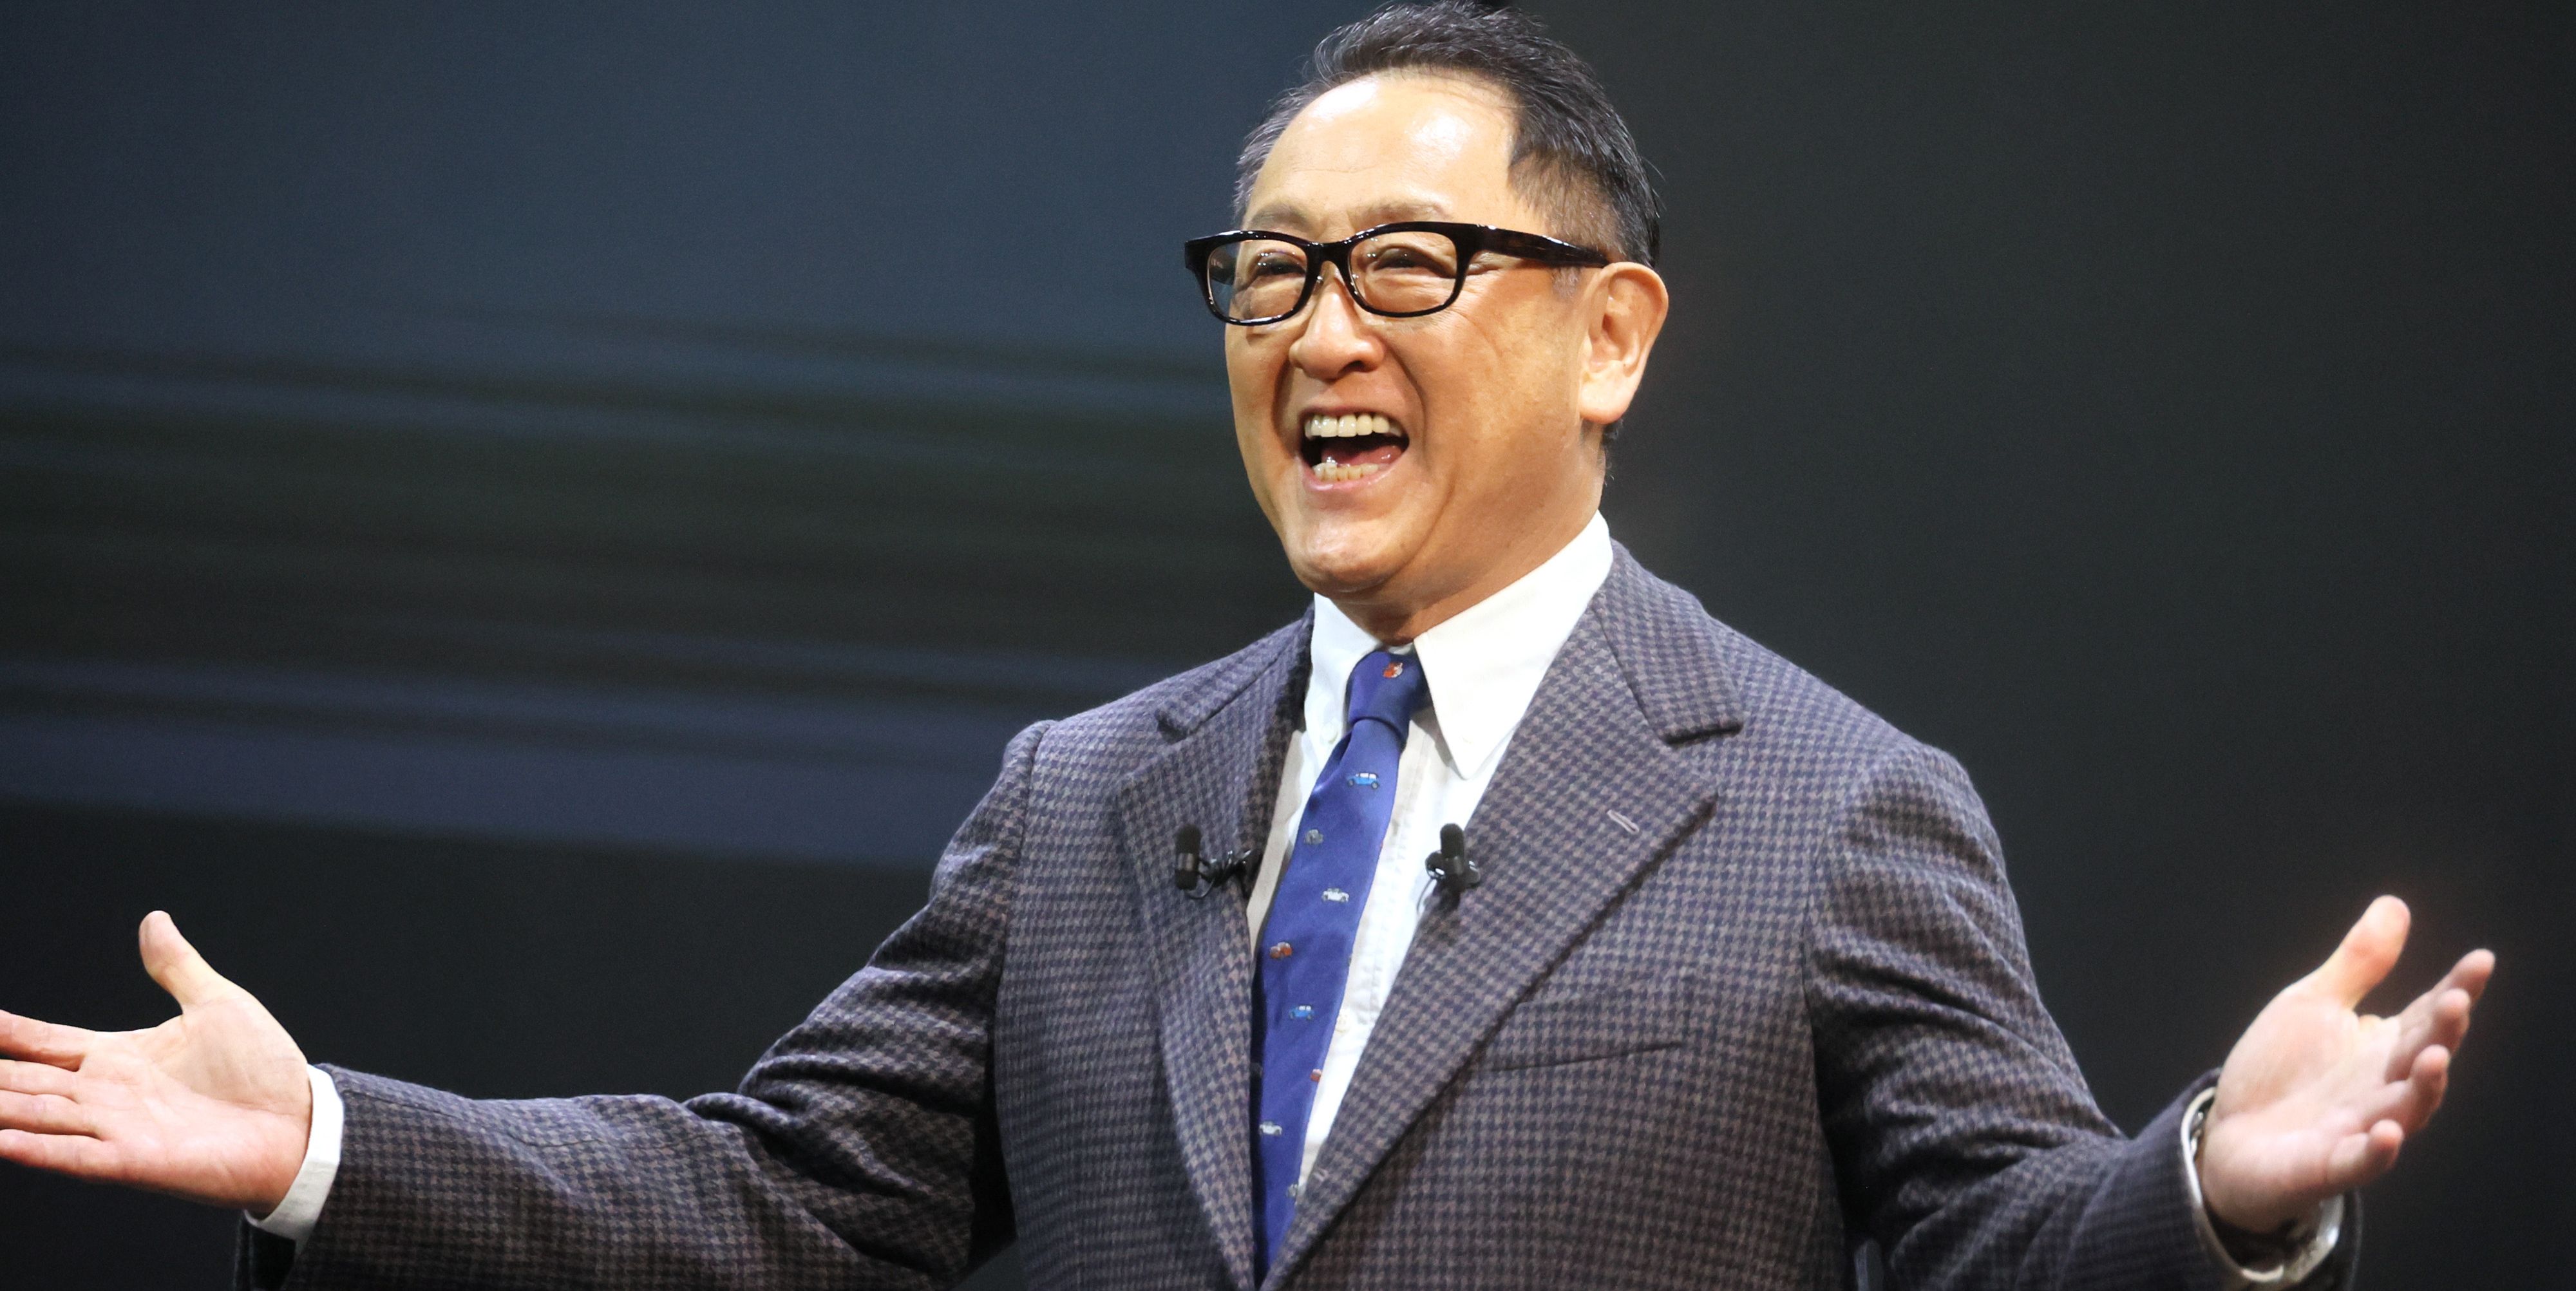 Akio Toyoda to Step Down as Toyota President and CEO